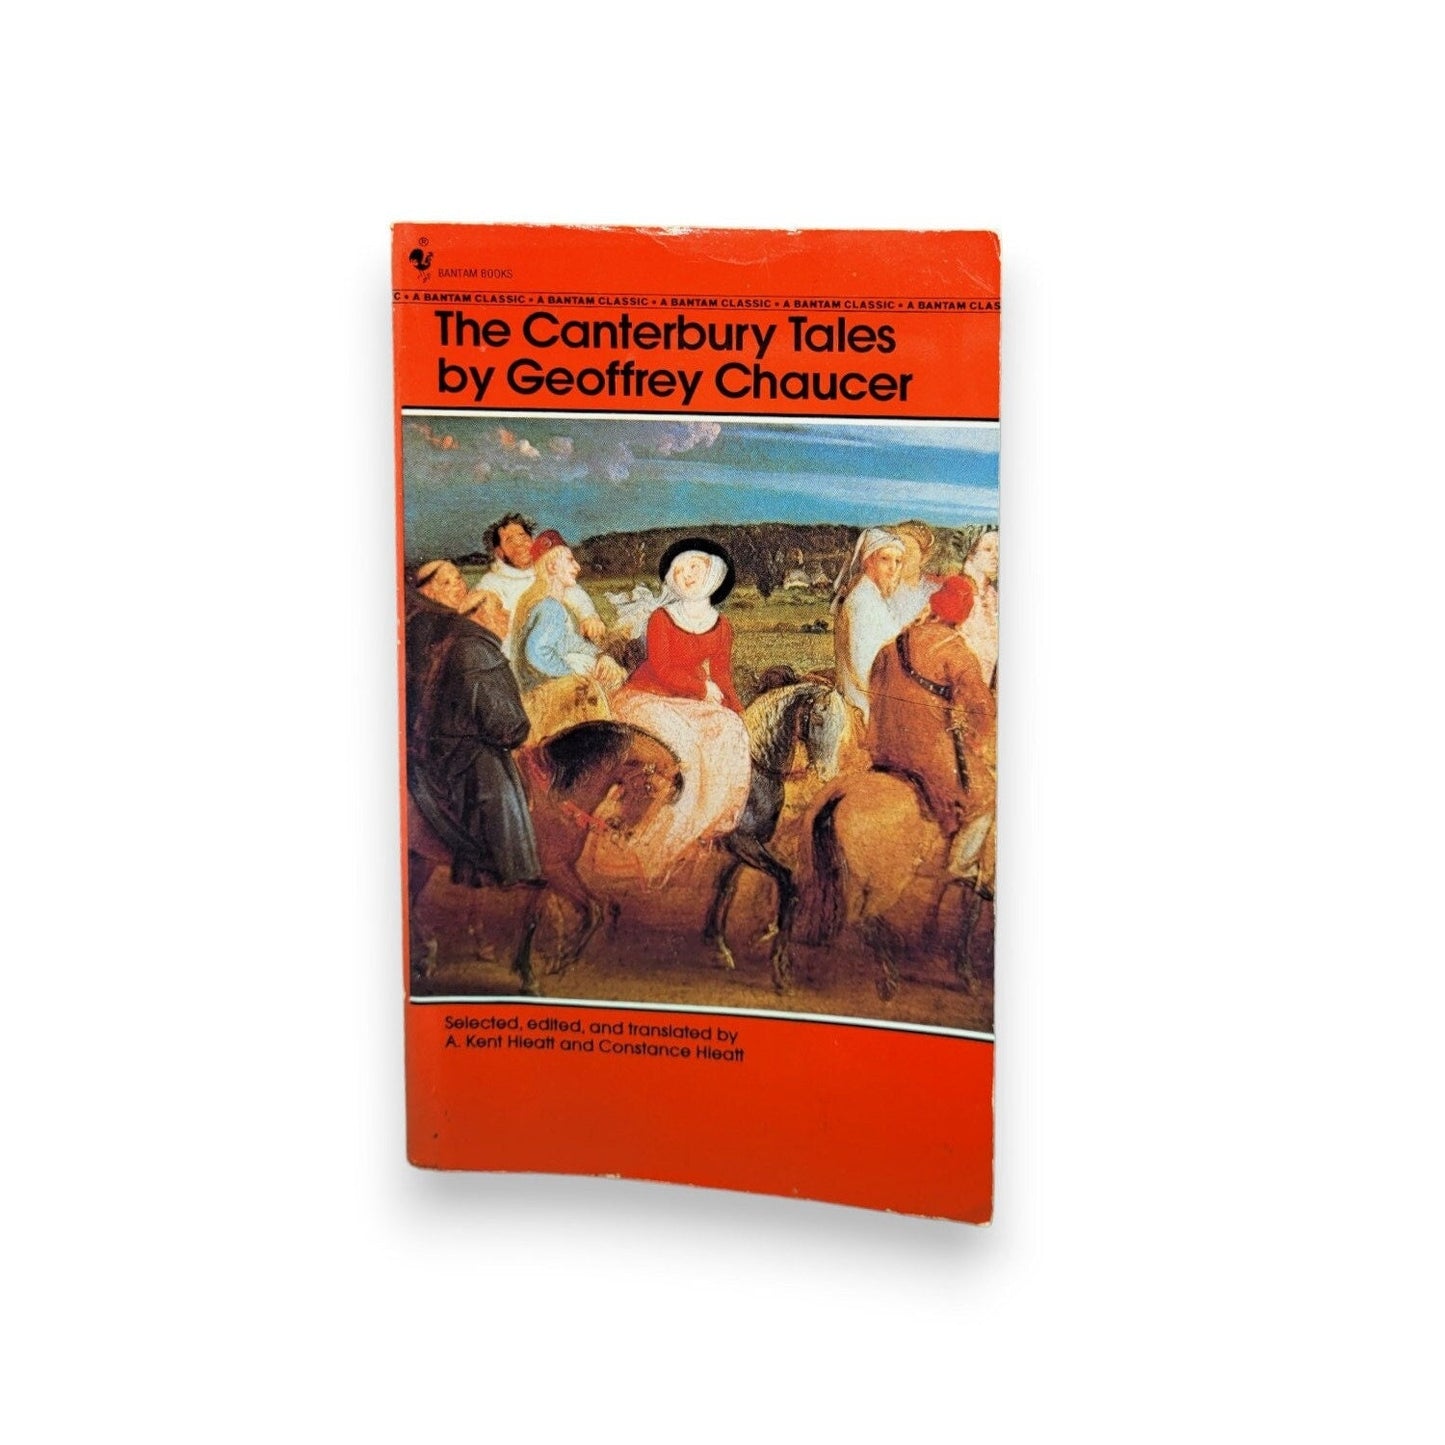 The Canterbury Tales by Geoffrey Chaucer 1964